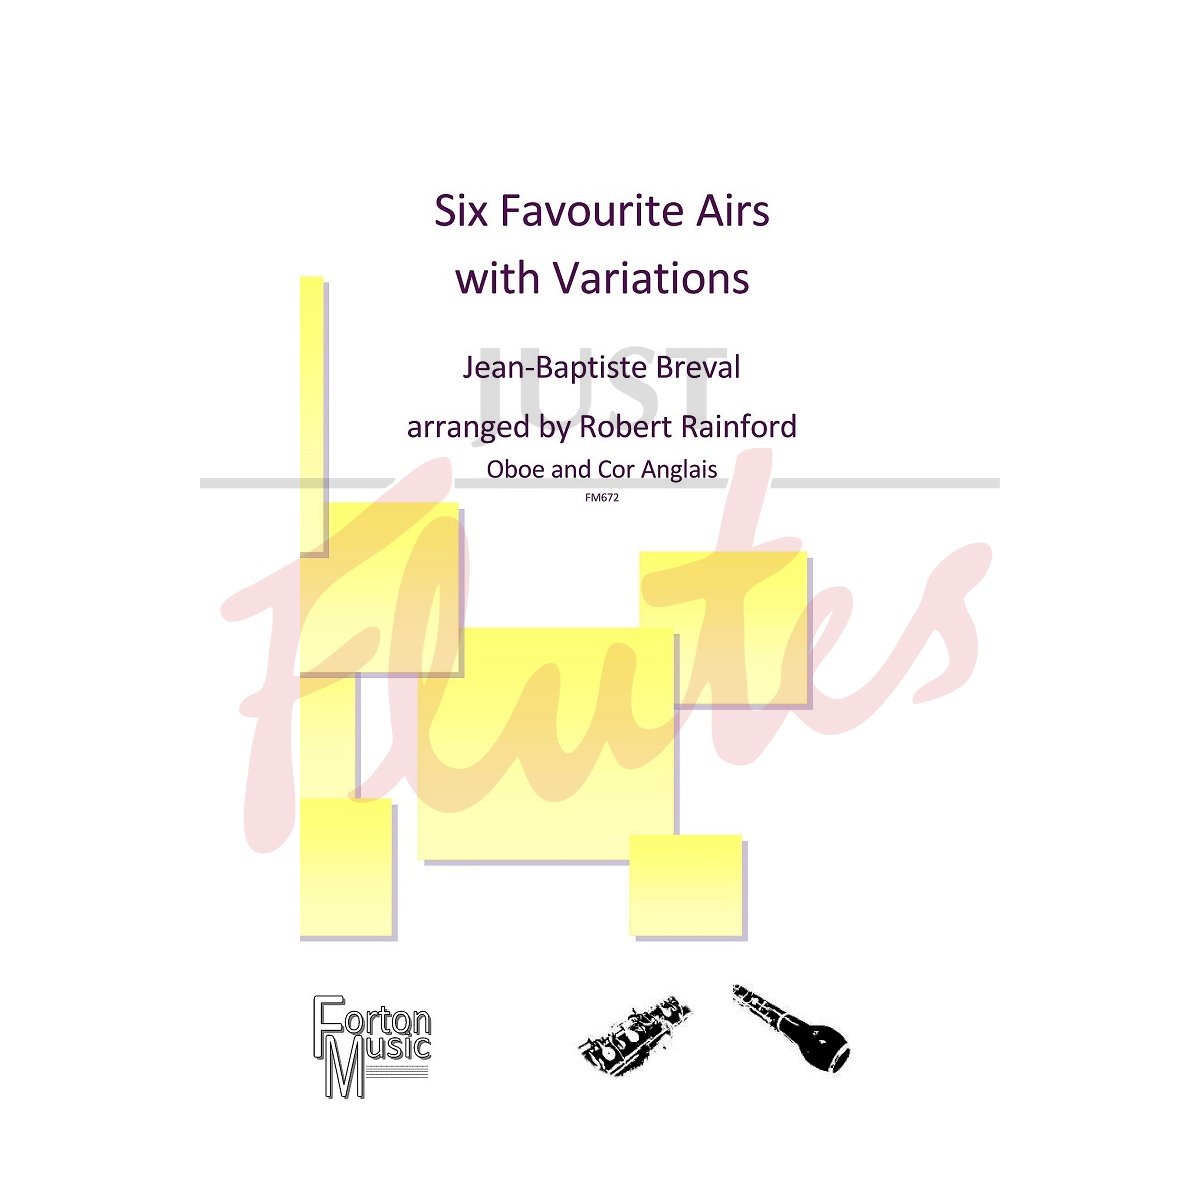 Six Favourite Airs with Variations [Oboe and Cor Anglais]